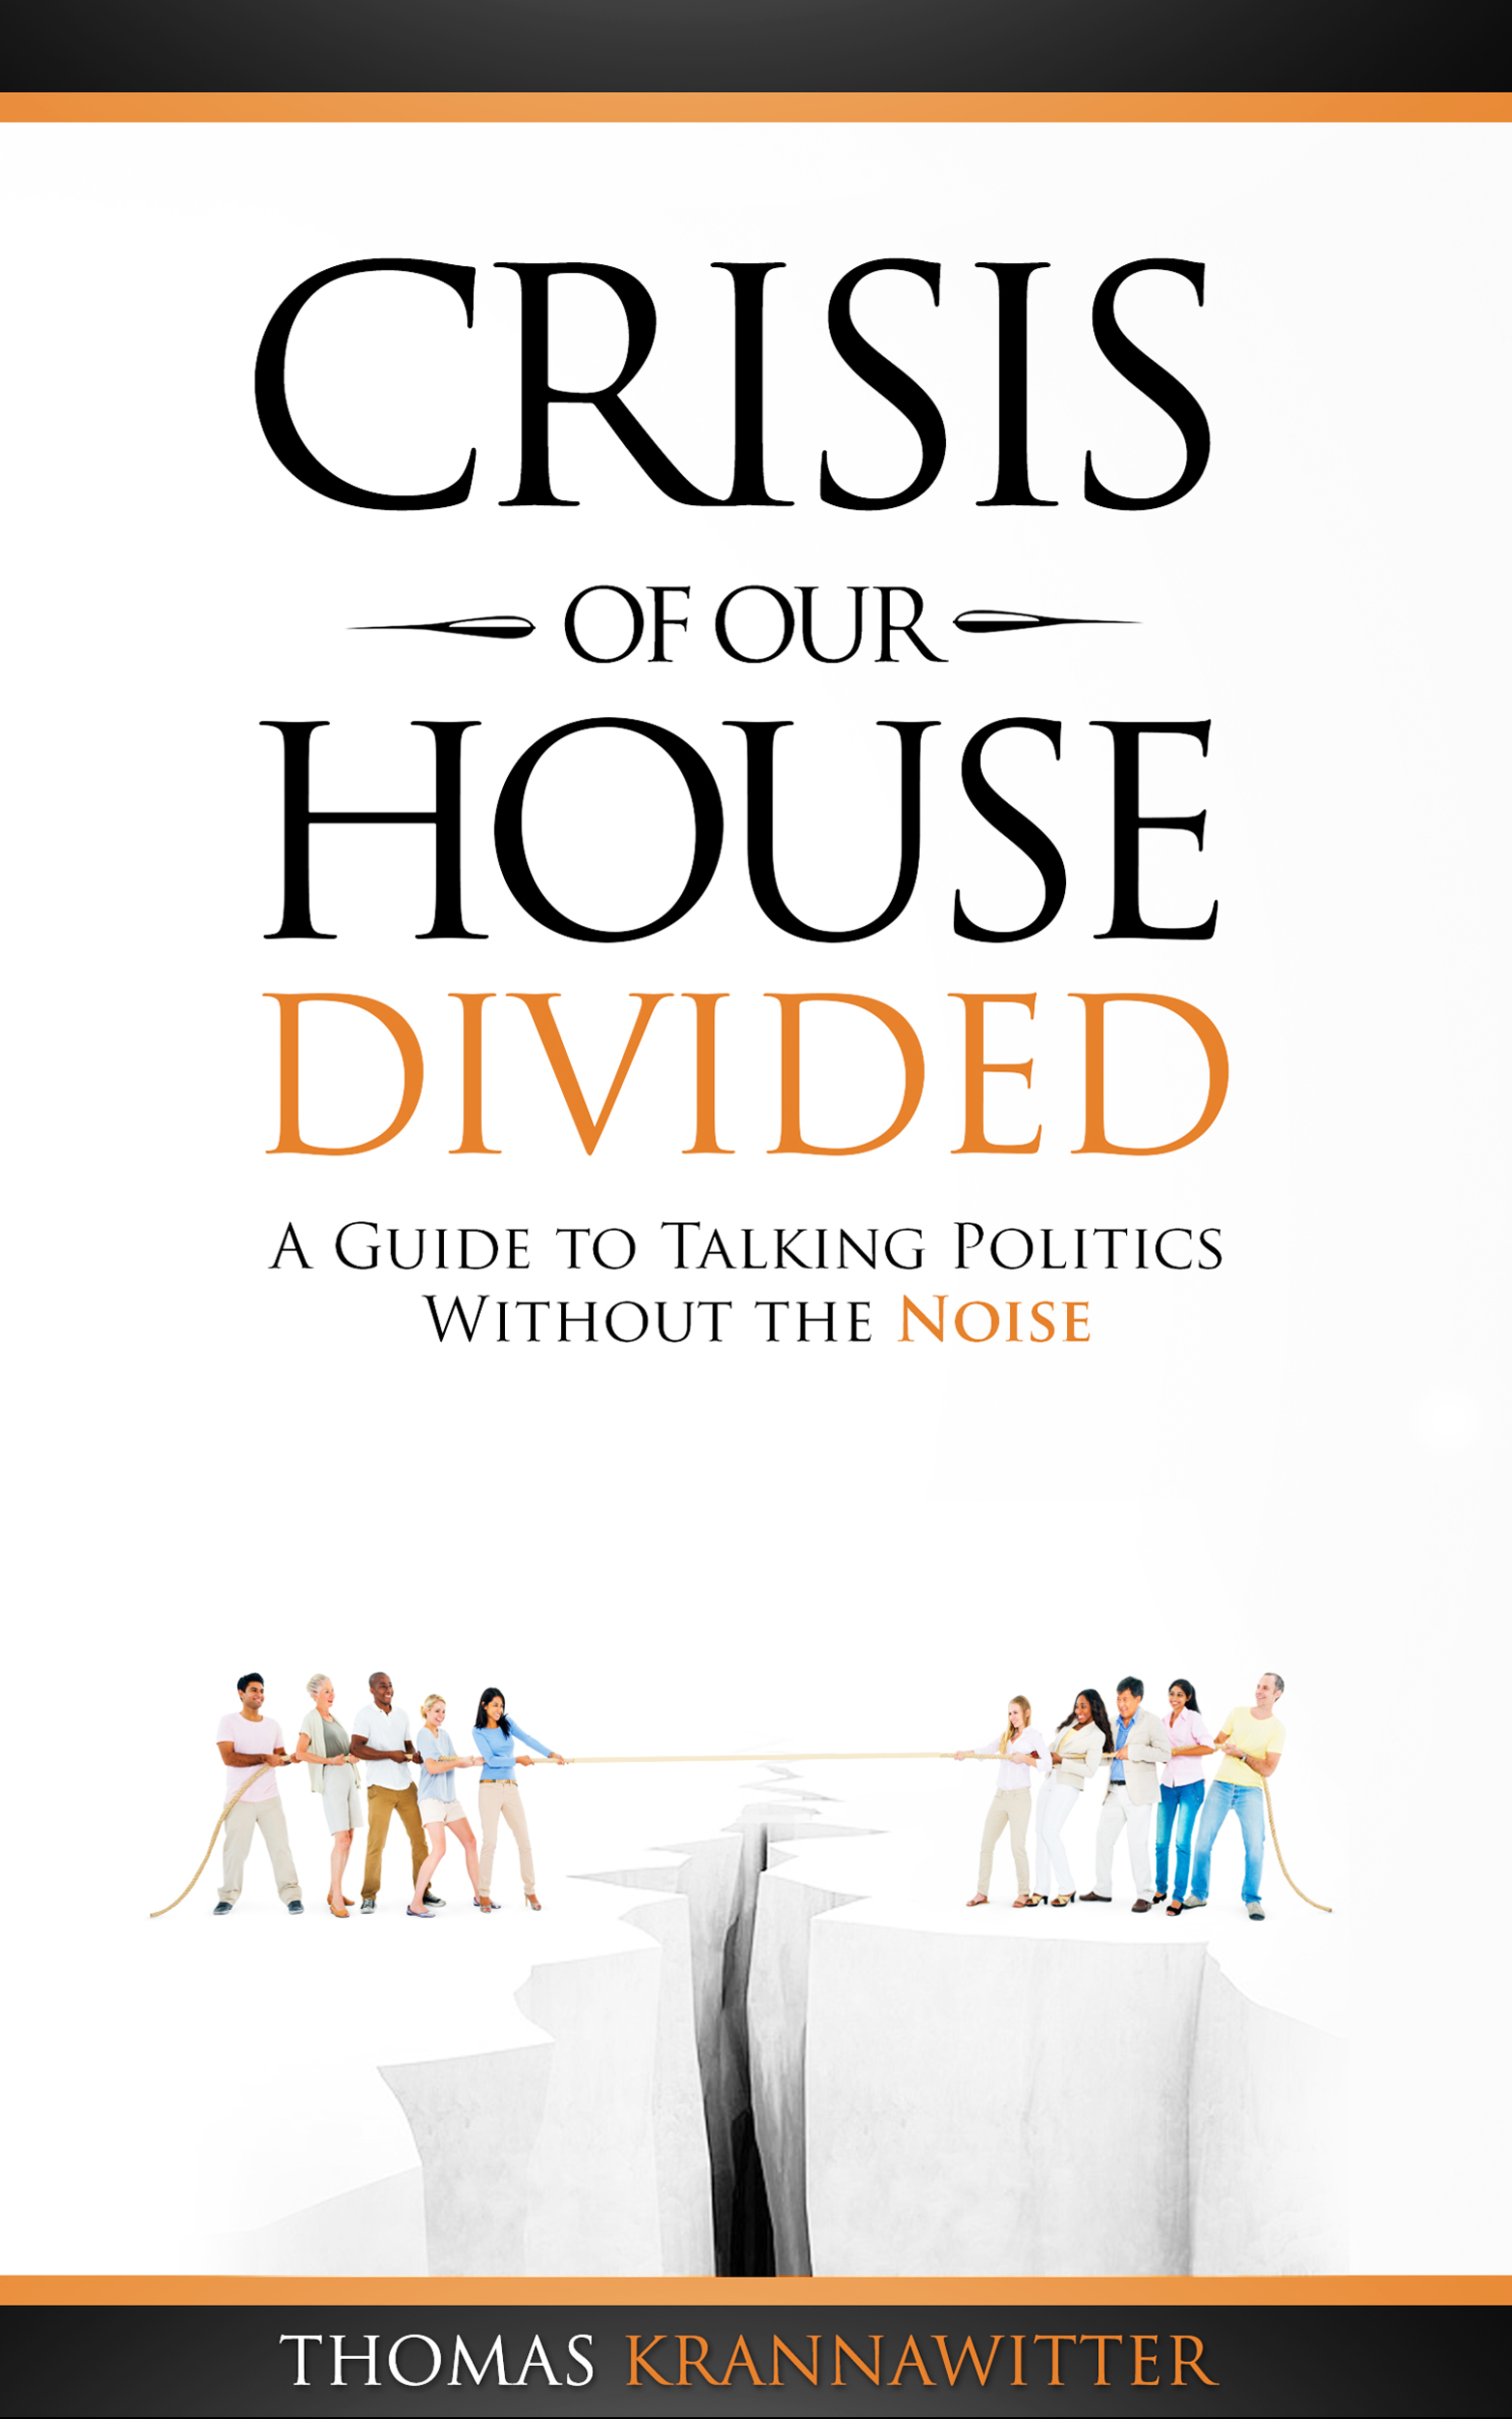 Thomas Krannawitter's Crisis of Our House Divided shows ordinary citizens how to speak about politics, without shouting.